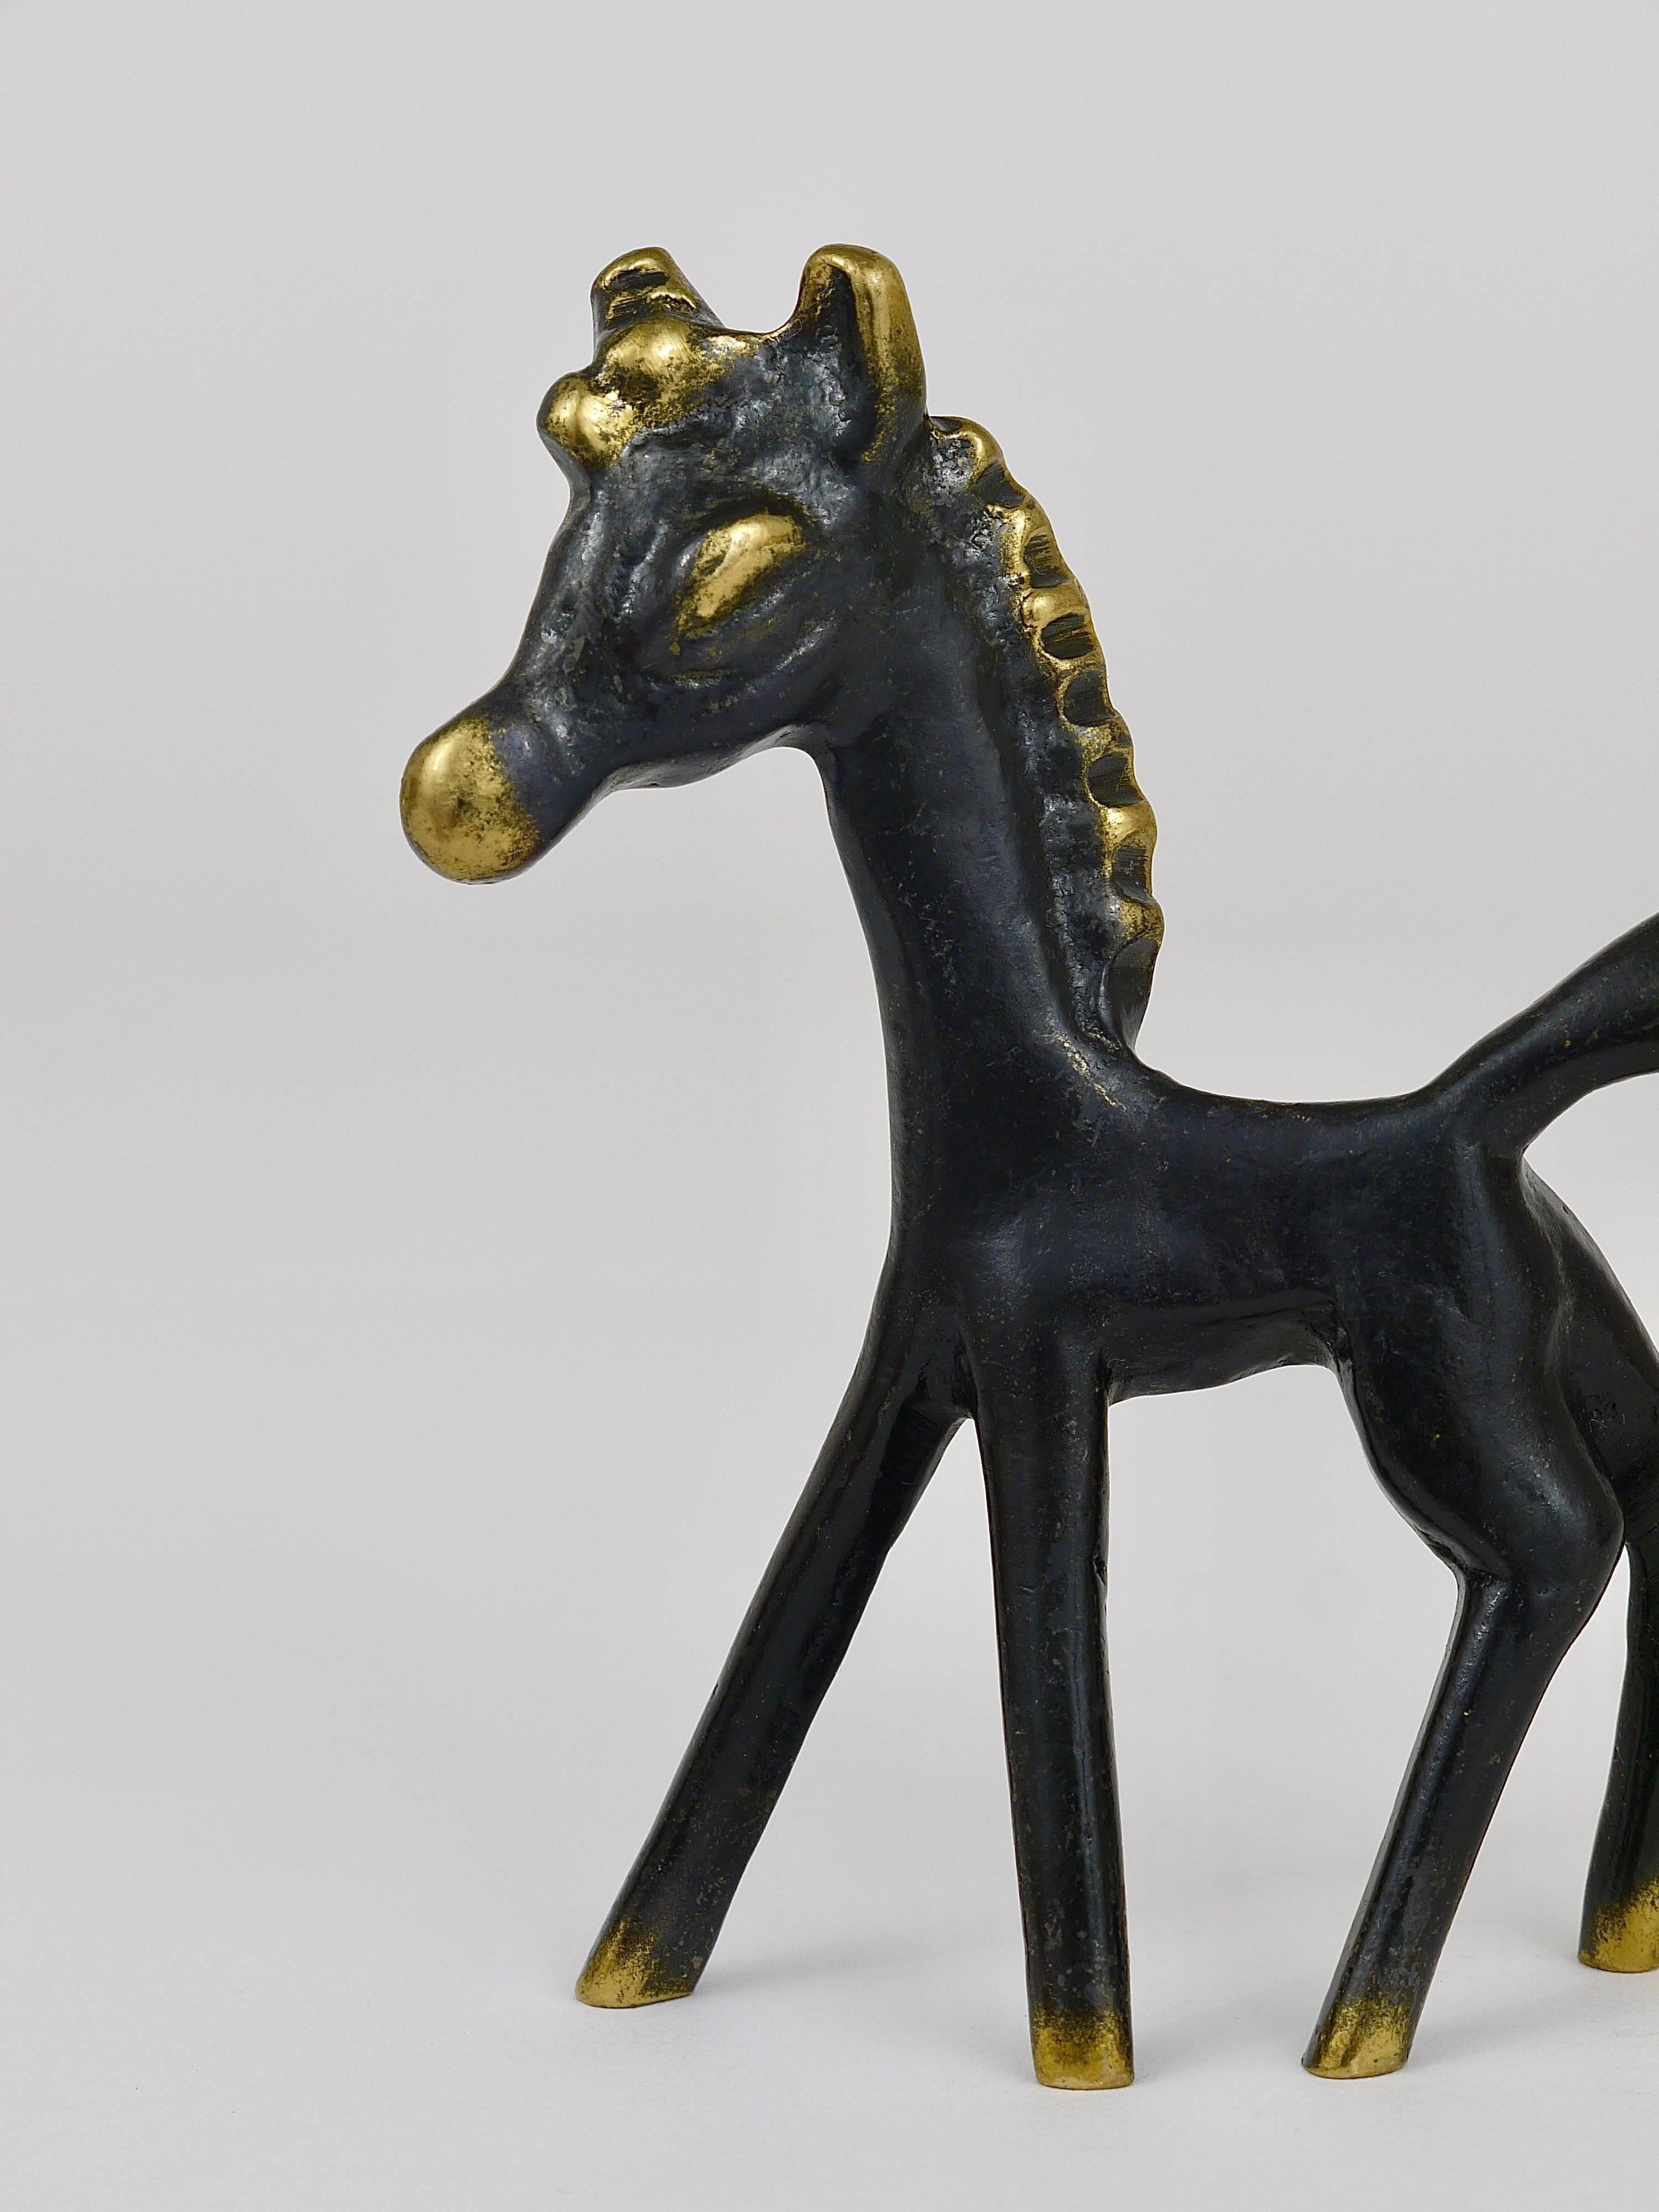 A lovely horse sculpture made of brass from the 1950s. Designed by Walter Bosse, executed by Hertha Baller. In excellent condition.